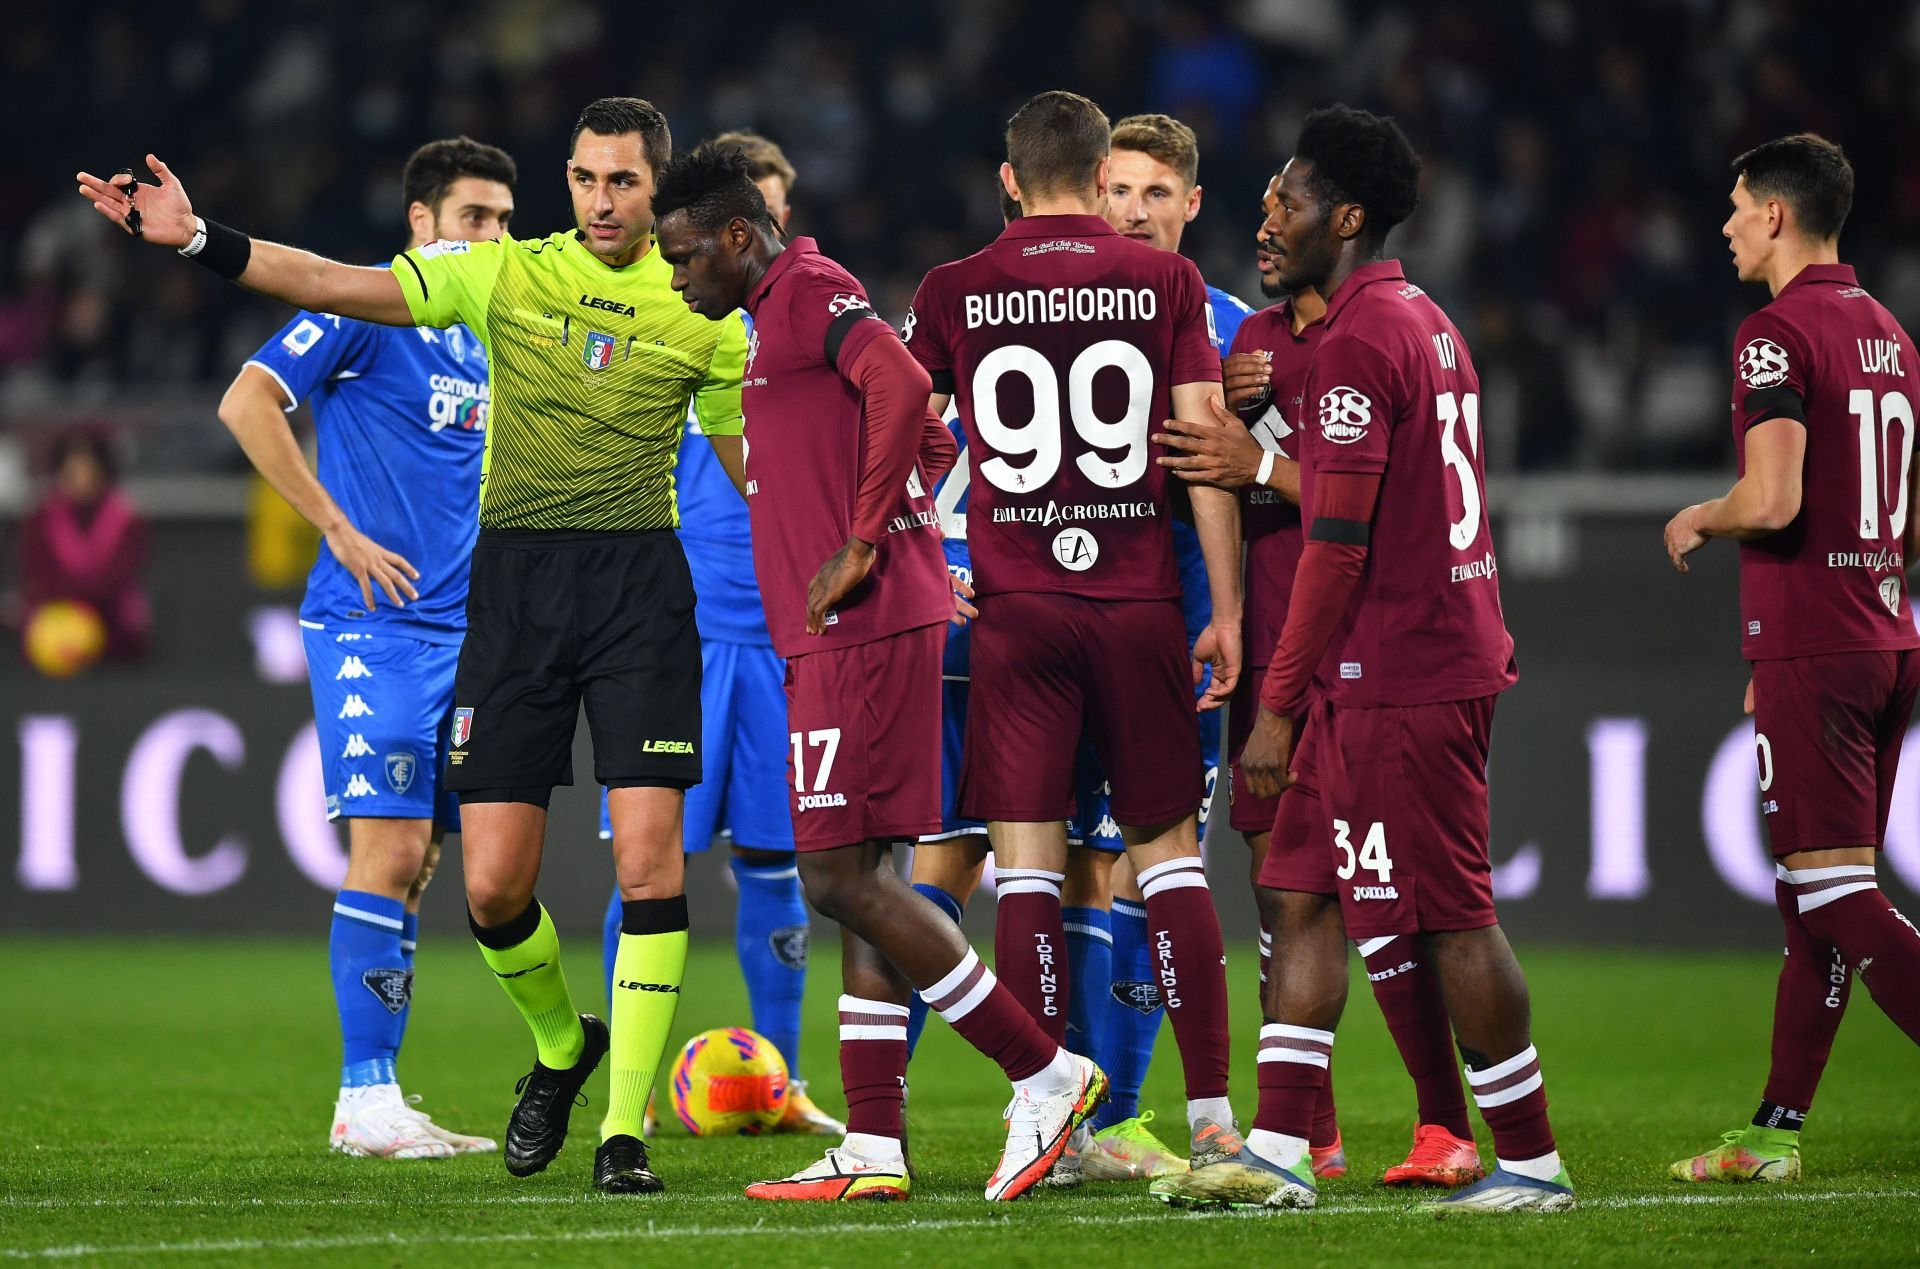 Torino and Bologna square off in their Serie A fixture on Sunday